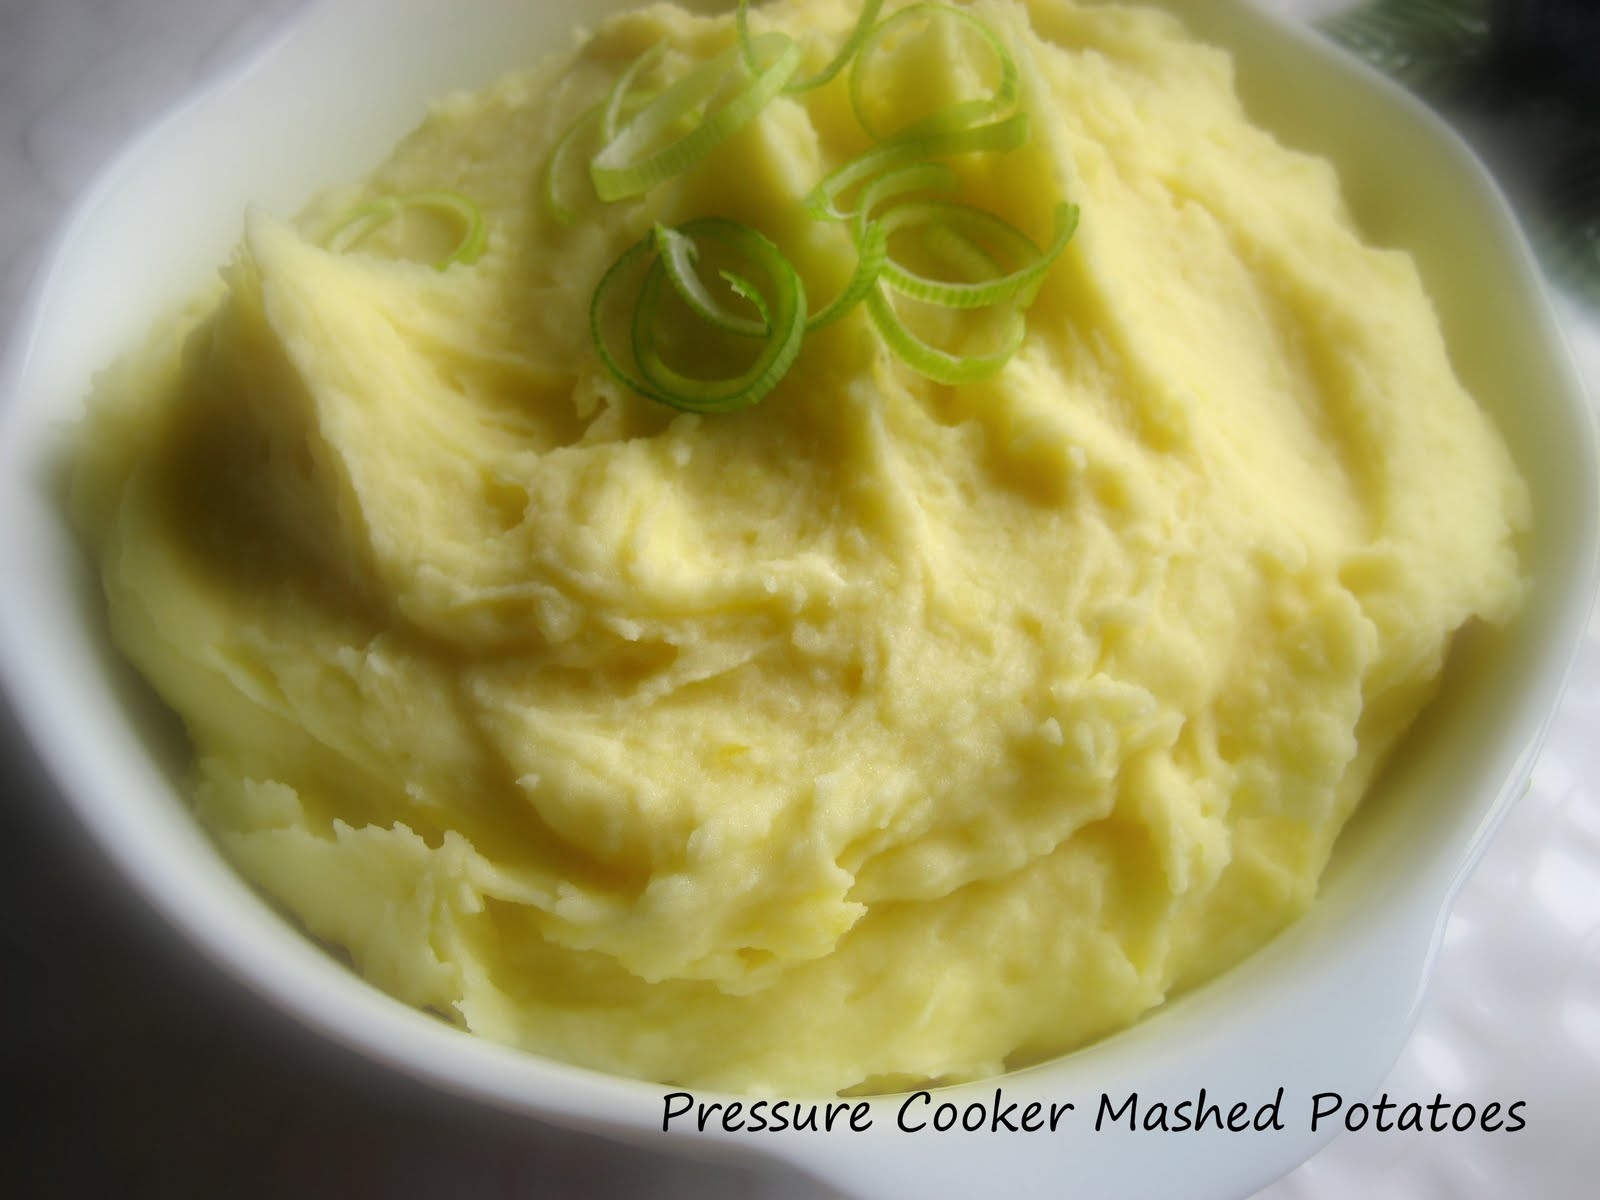 Pressure Cooker Mashed Potatoes
 Home Cooking In Montana Pressure Cooker Mashed Potatoes